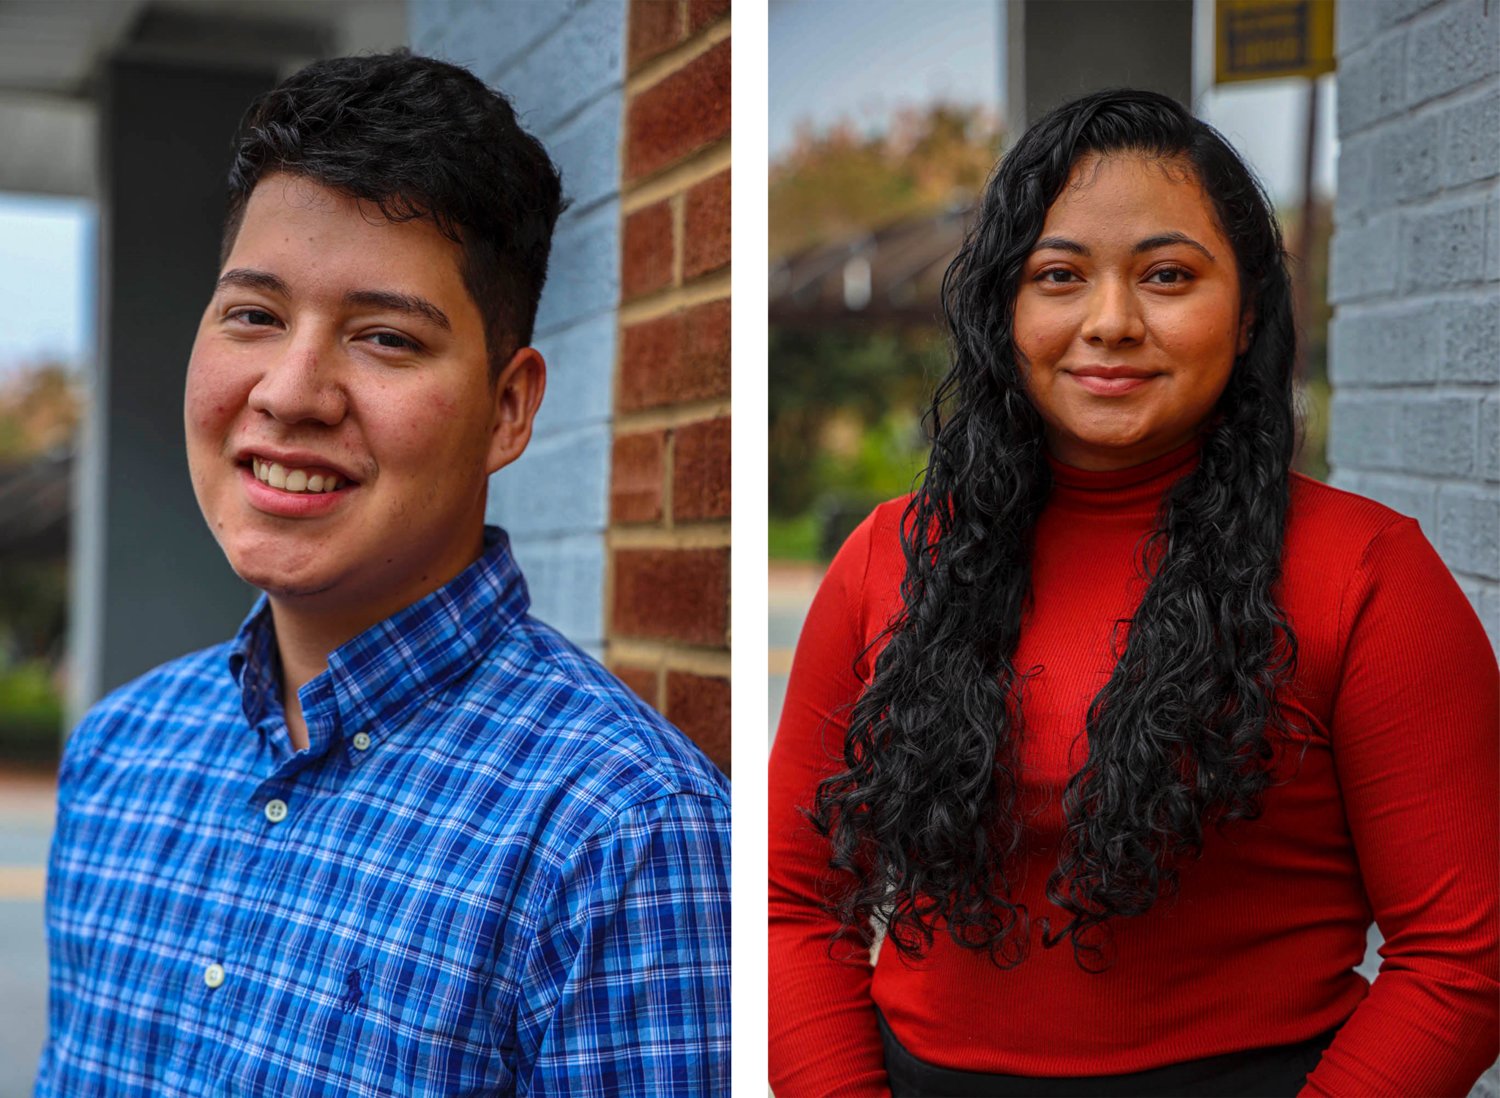 Bryant Parroquin and Maria Gomez Flores are the Hispanic Liaison's two newest employees. Parroquin is their communications manager, while Gomez Flores is their advocacy and civic engagement program manager.